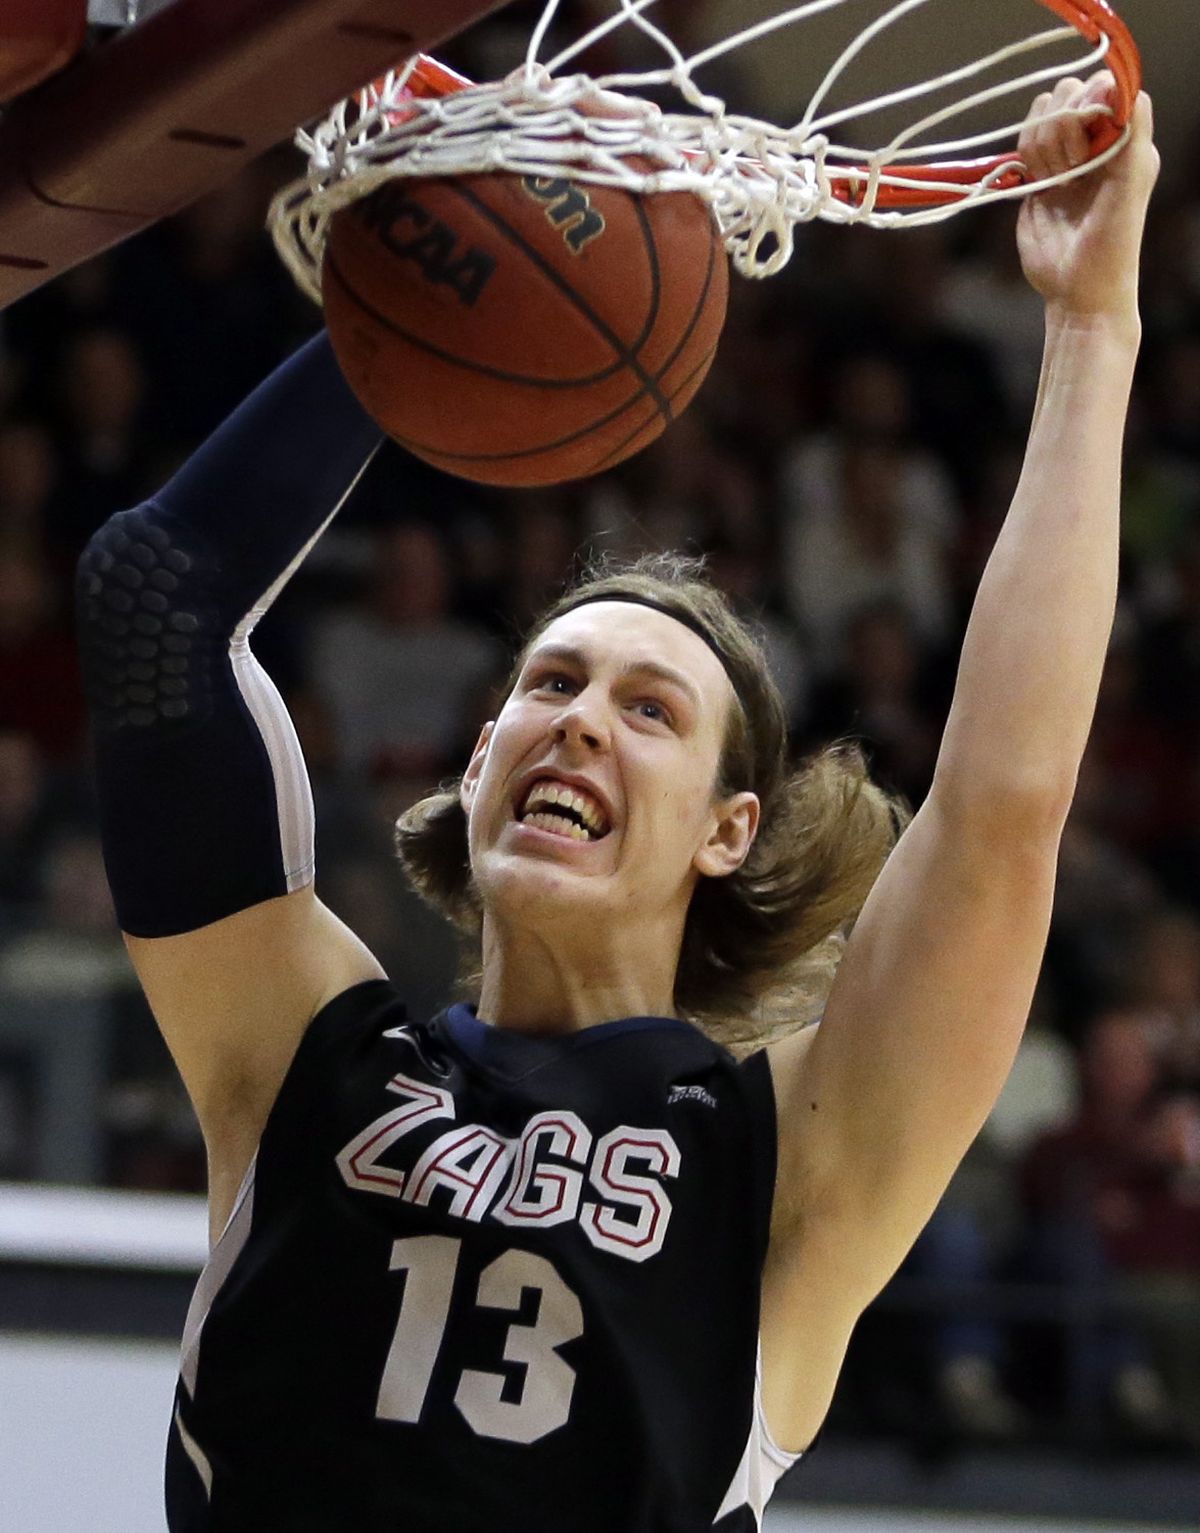 Kelly Olynyk leads Gonzaga in scoring at 18.1 points per game. (Associated Press)